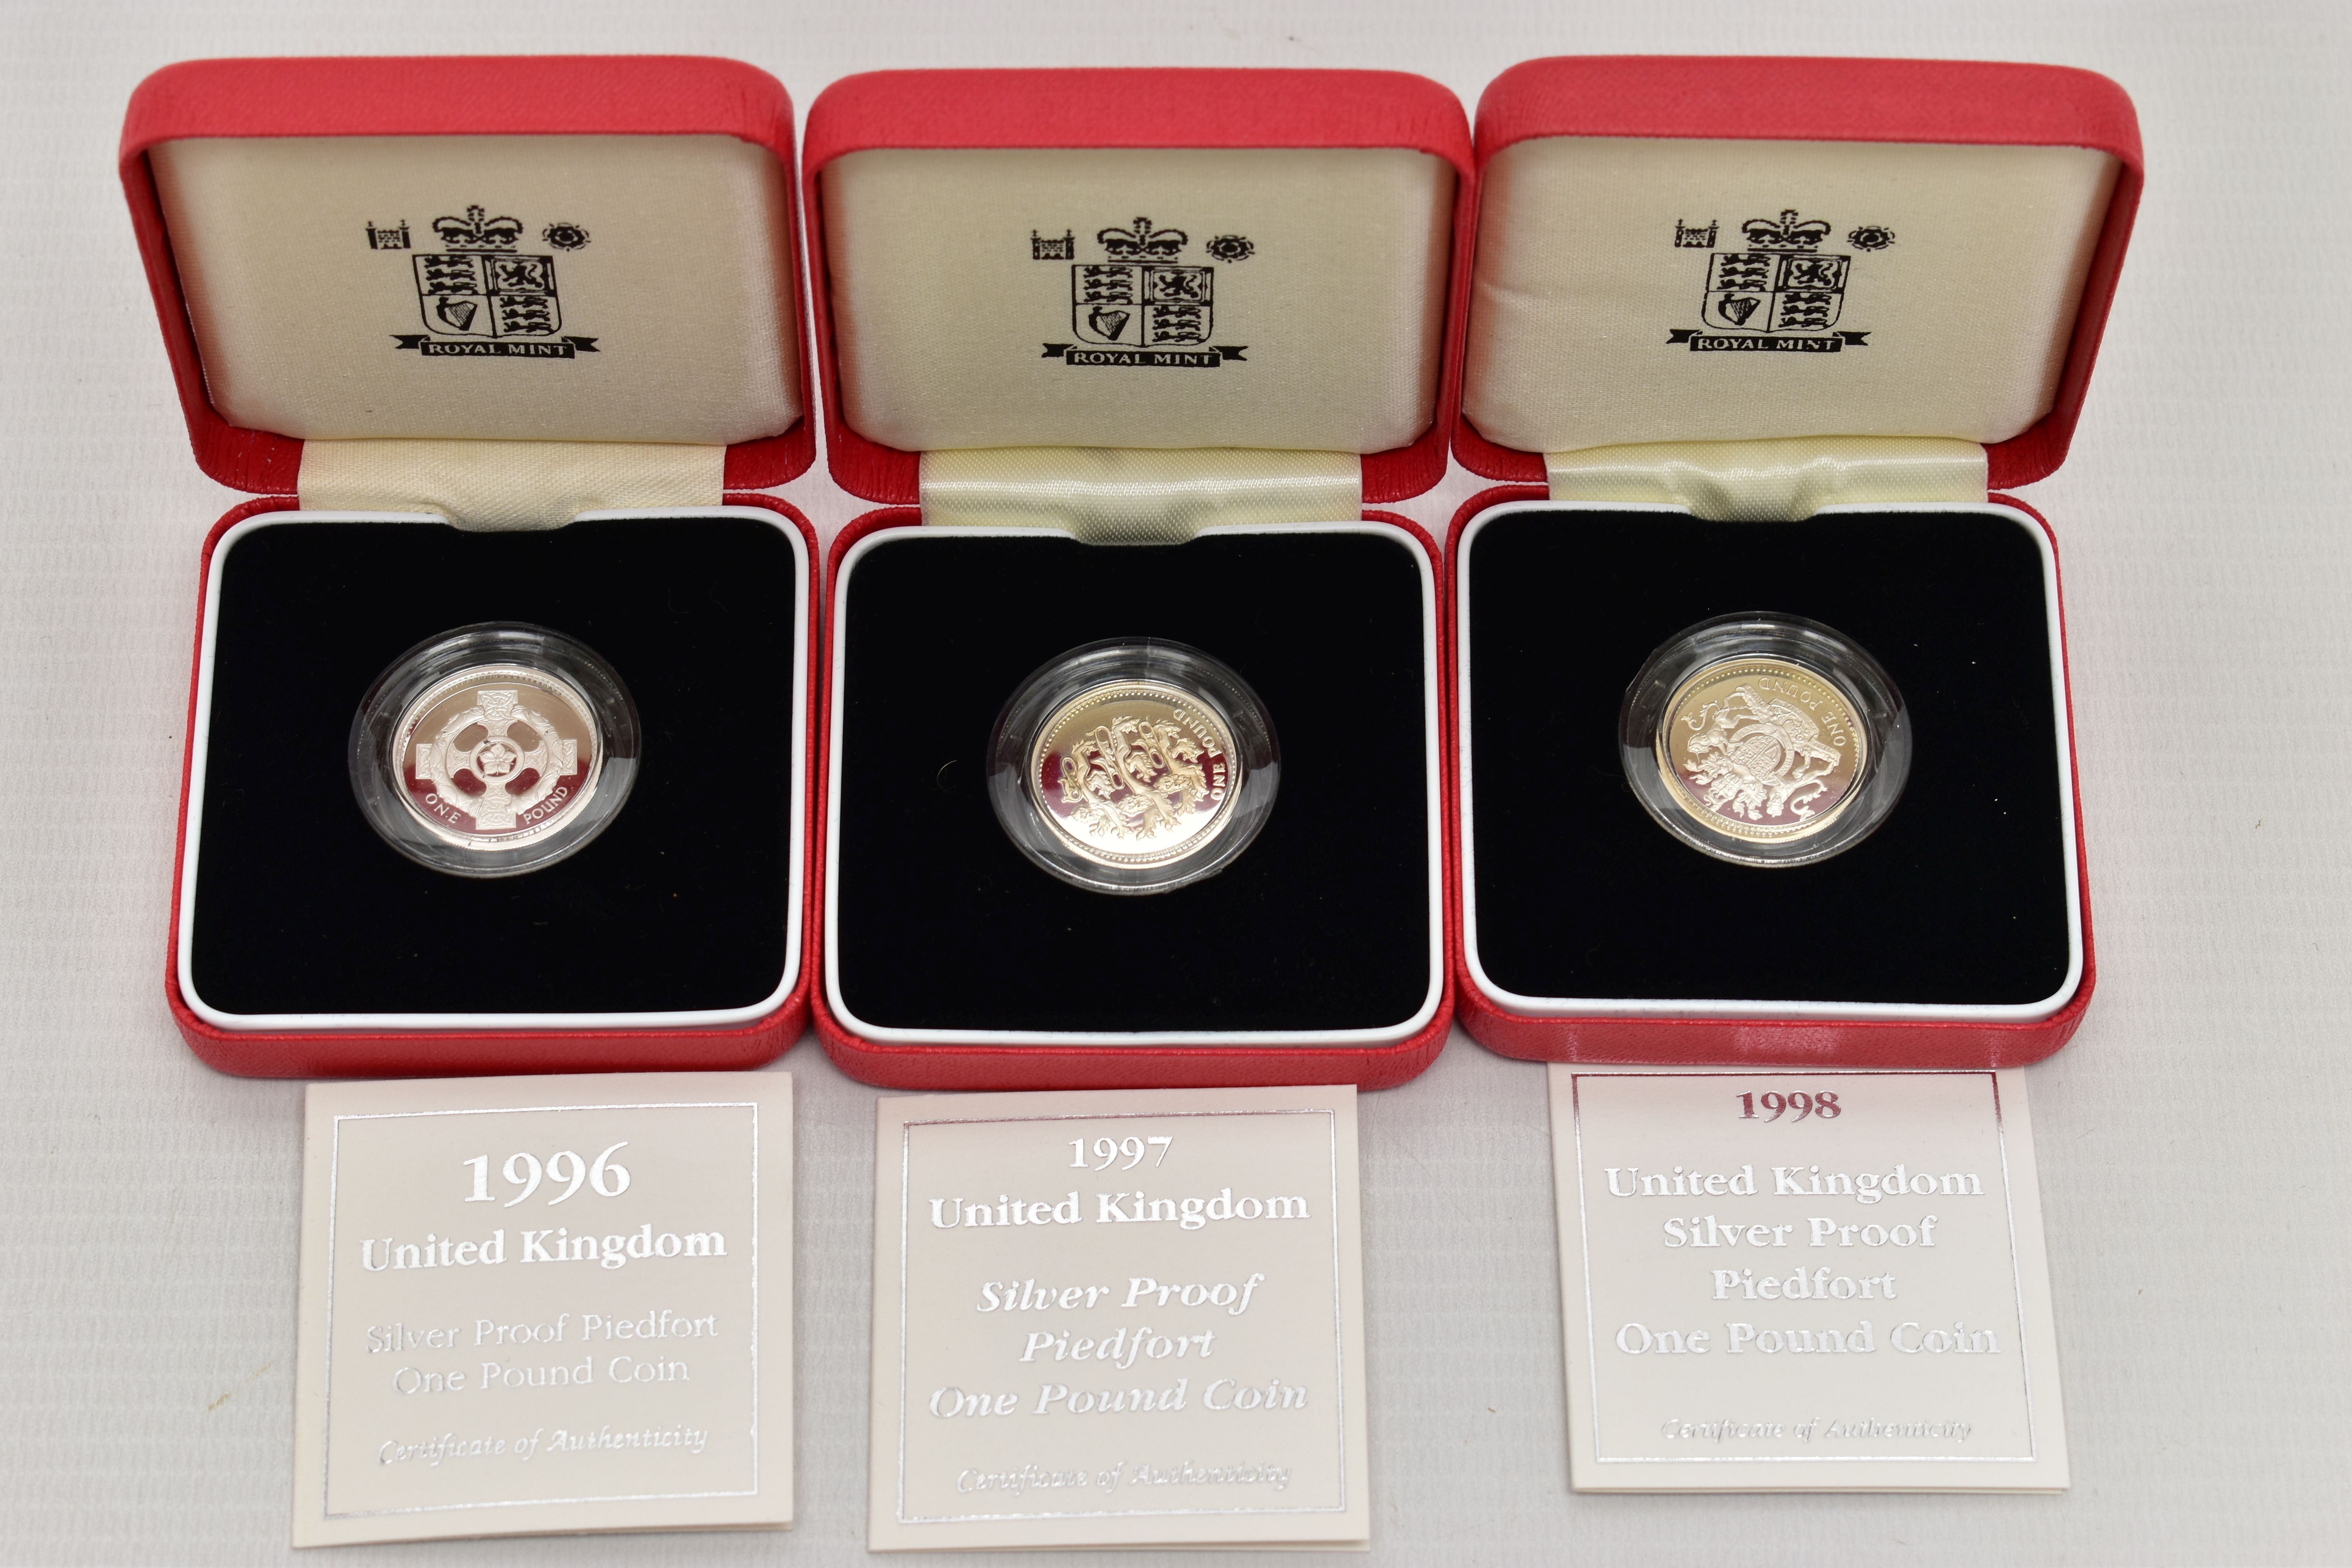 SILVER PIEDFORT PROOF ROYAL MINT ONE POUND COINS 1996, 1997, 1998, all boxed with cetificates